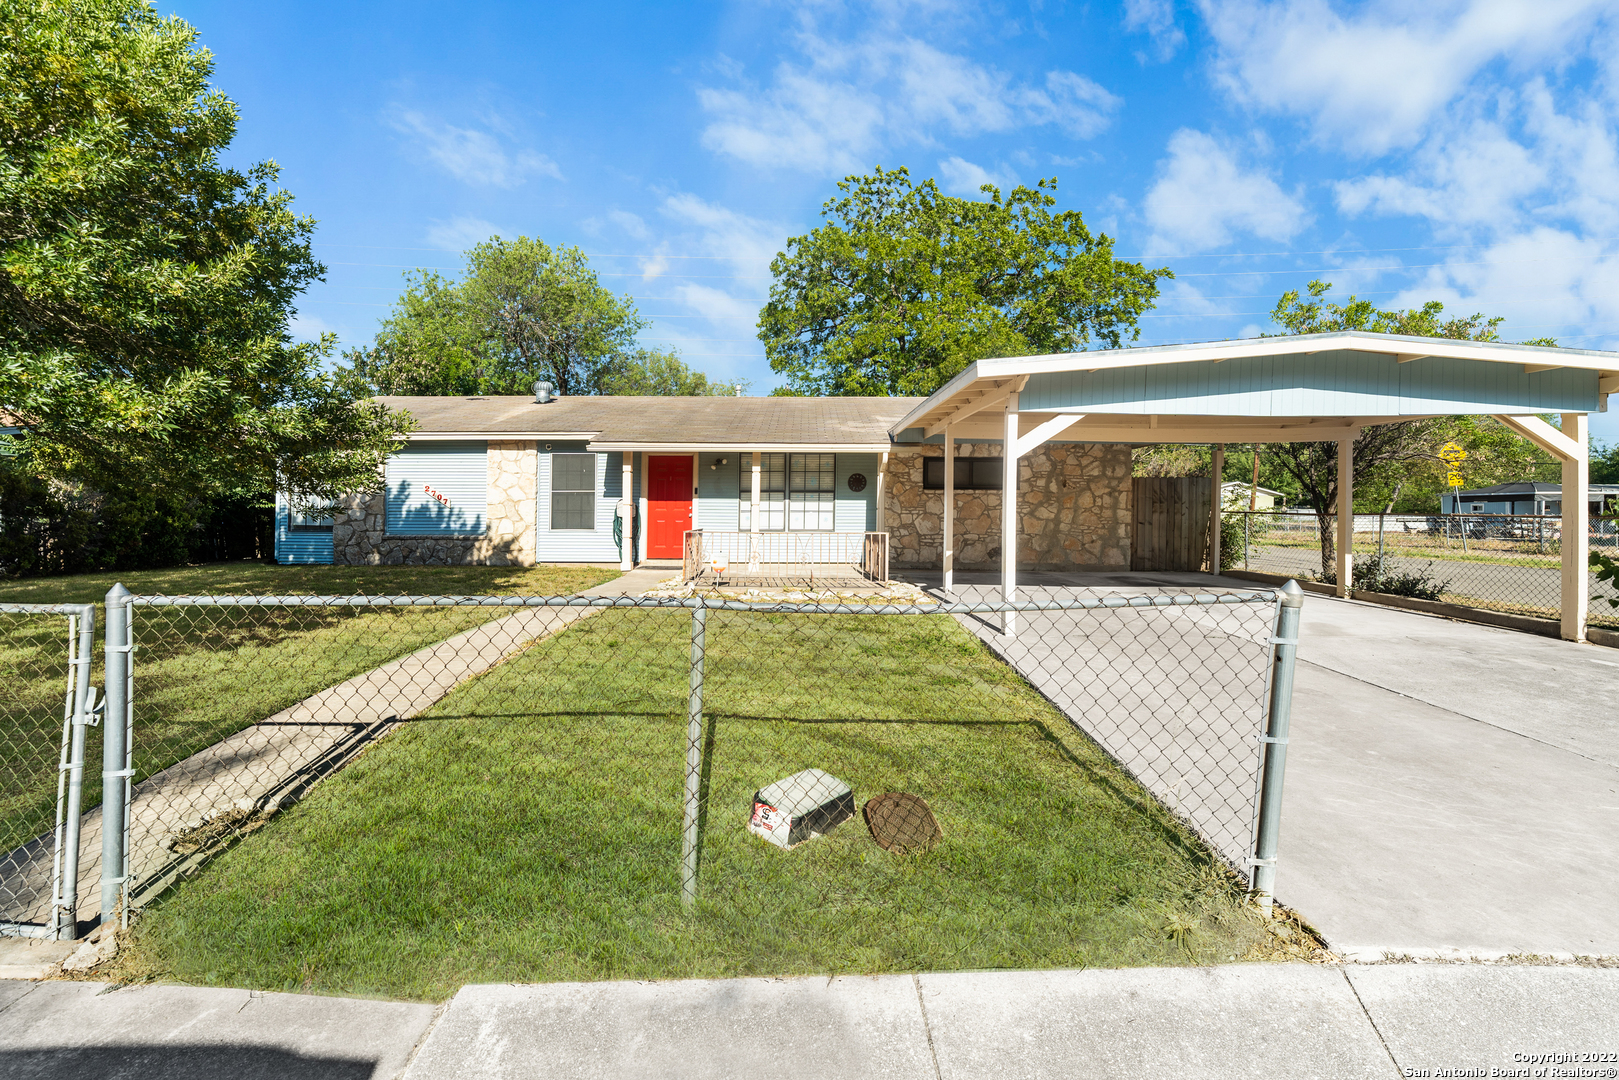 Great starter or investment property that offers 3 bed 1 bath almost a quarter acre on a corner lot located in Lackland Terrace neighborhood. Enjoy your spacious 37' x 14' covered patio. Shed conveys. Minutes to 151, 1604, and 410. Conveniently located near Lackland AFB. Home is being sold as is. Ask to see this one today!